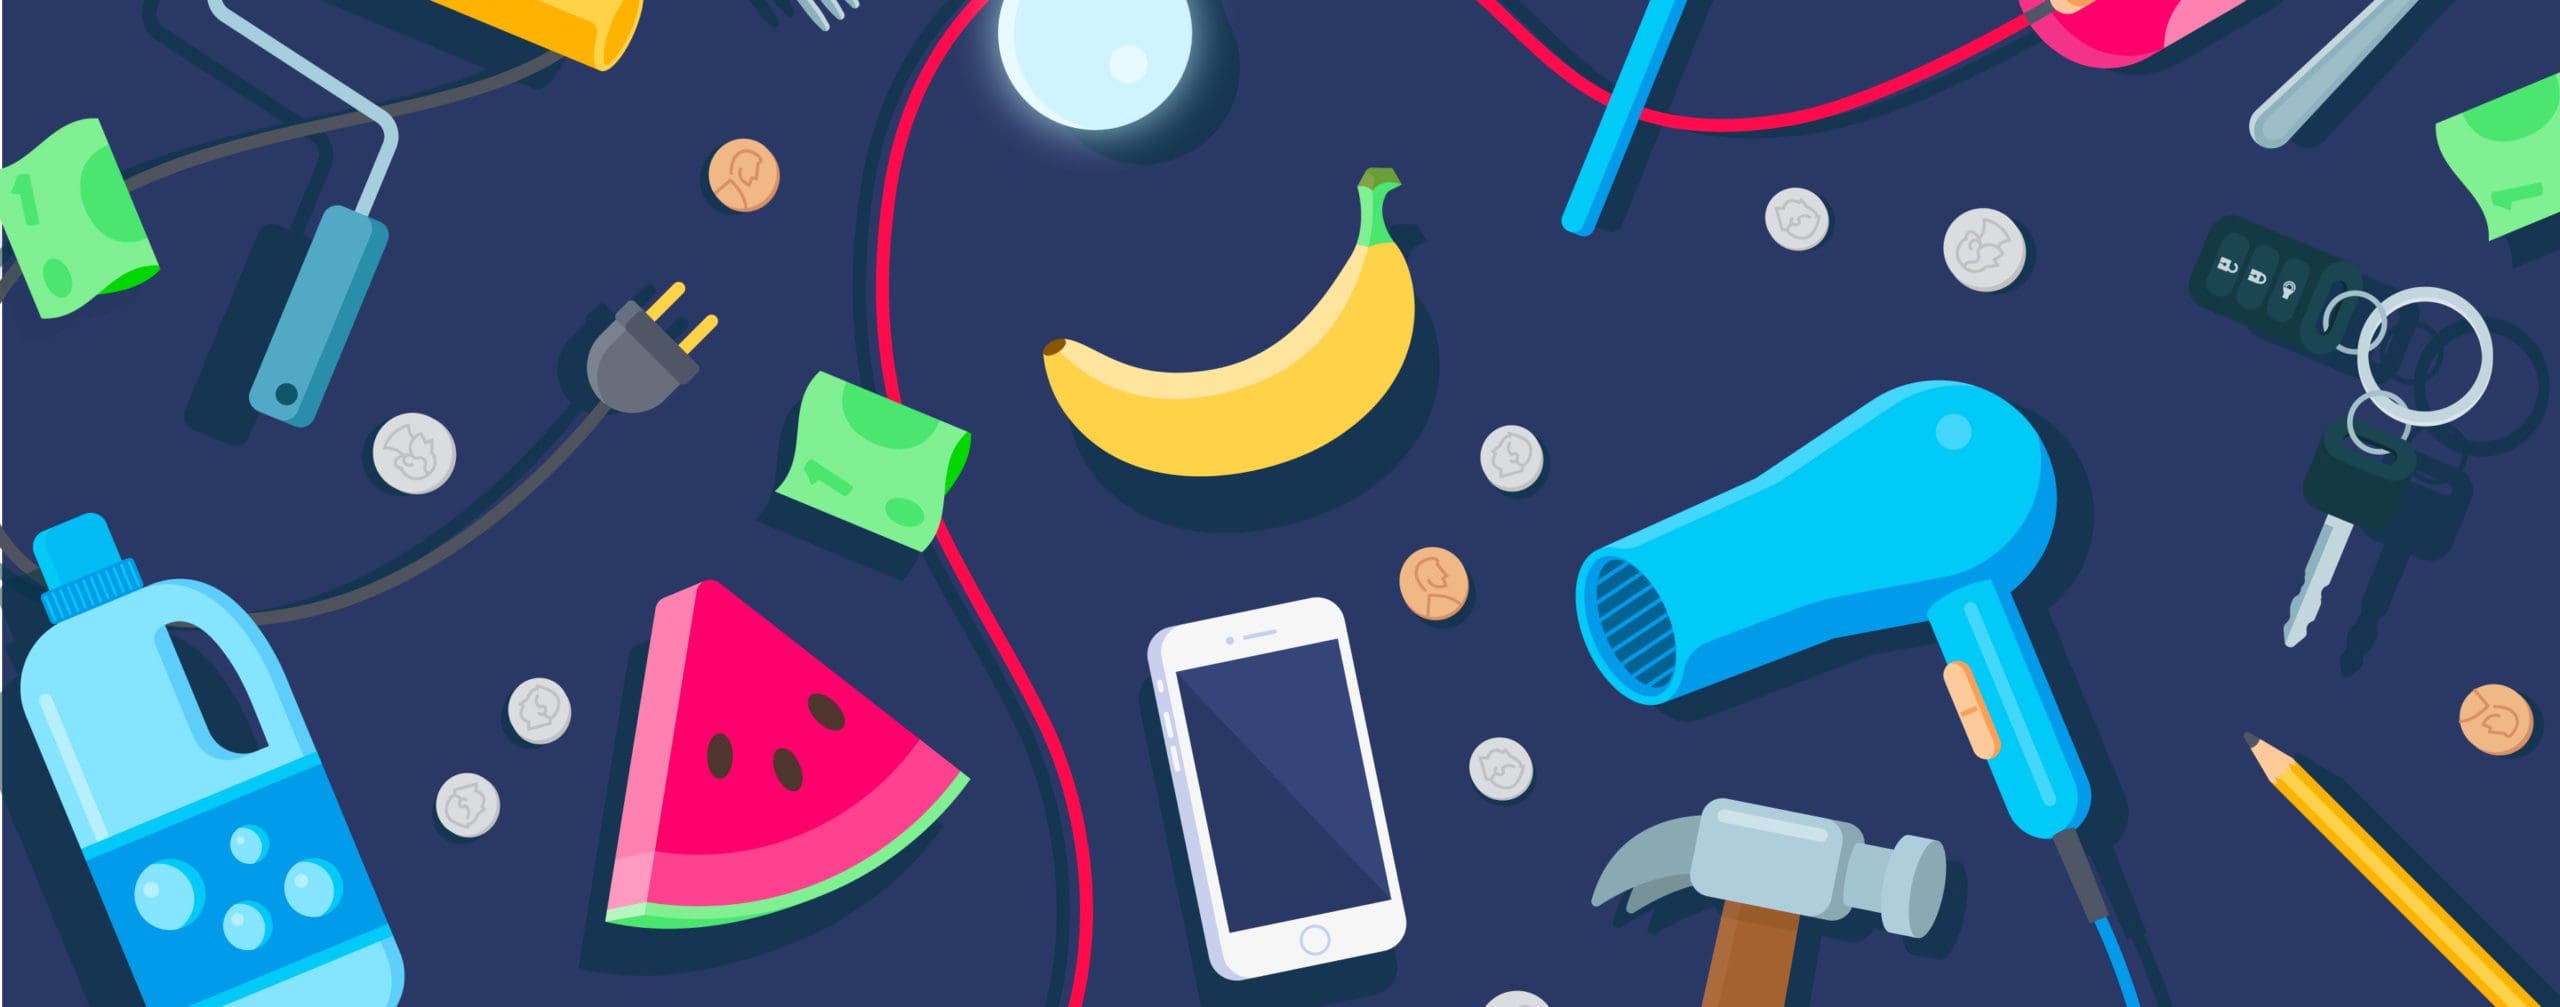 icons with fruit, phone and other living items